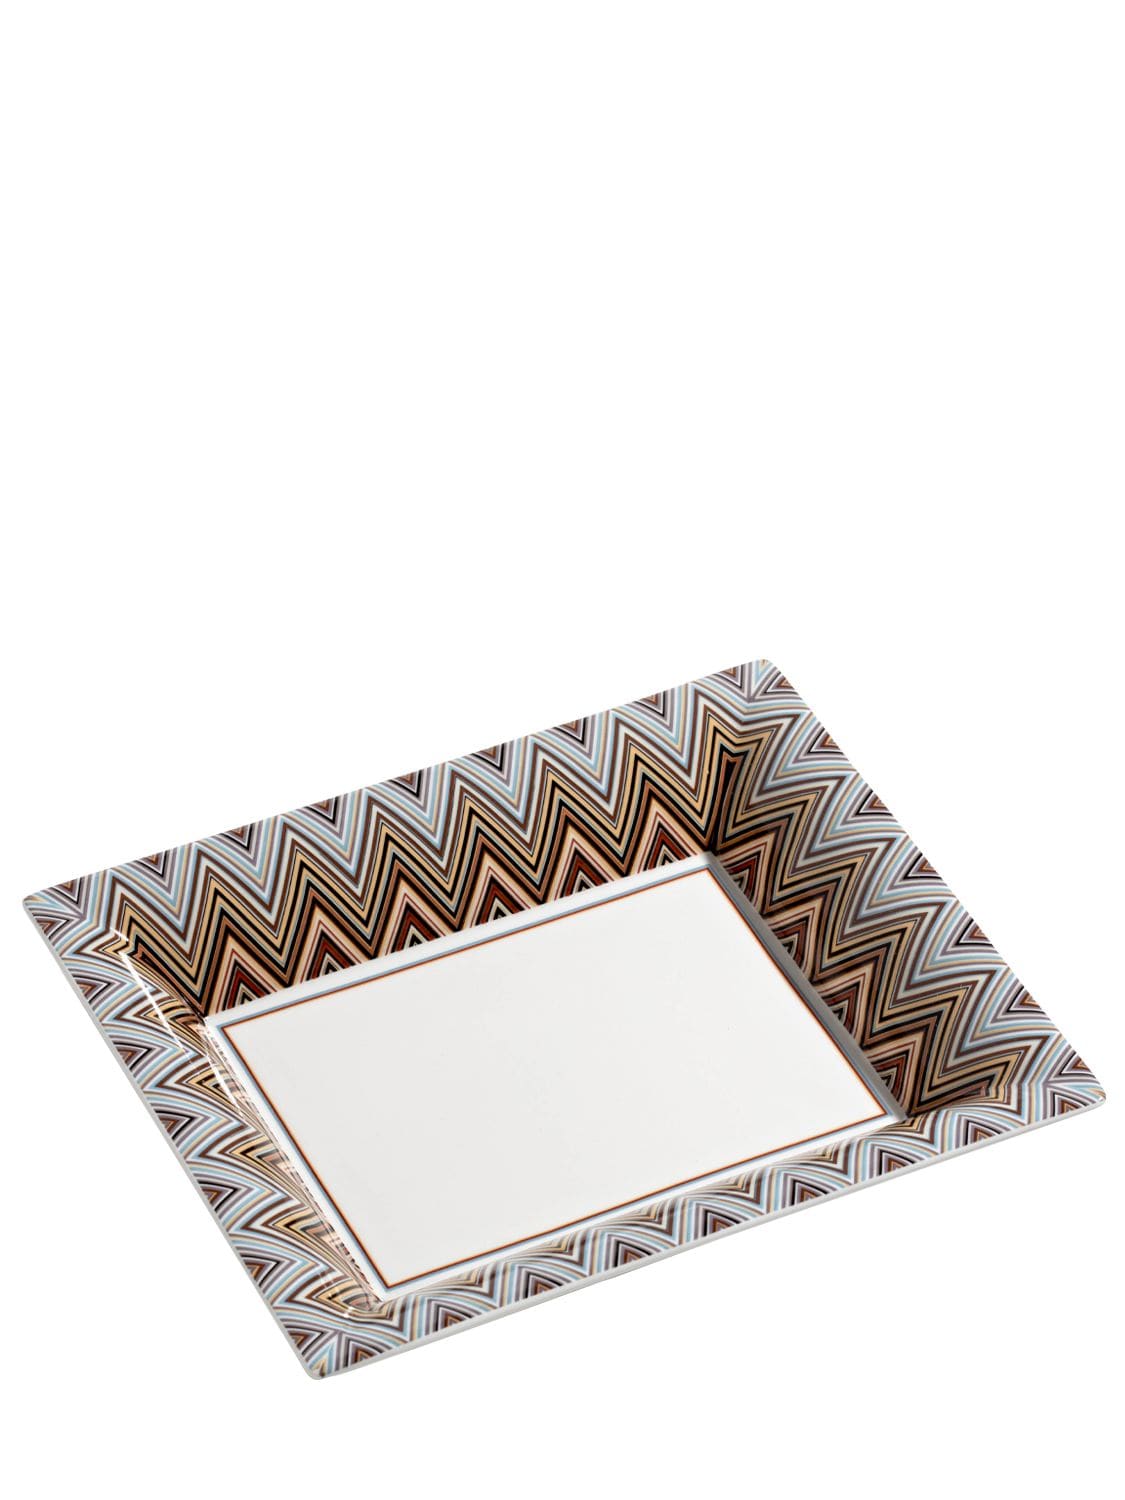 Missoni Home Collection Zig Zag Jarris Large Rectangular Tray In Multicolor